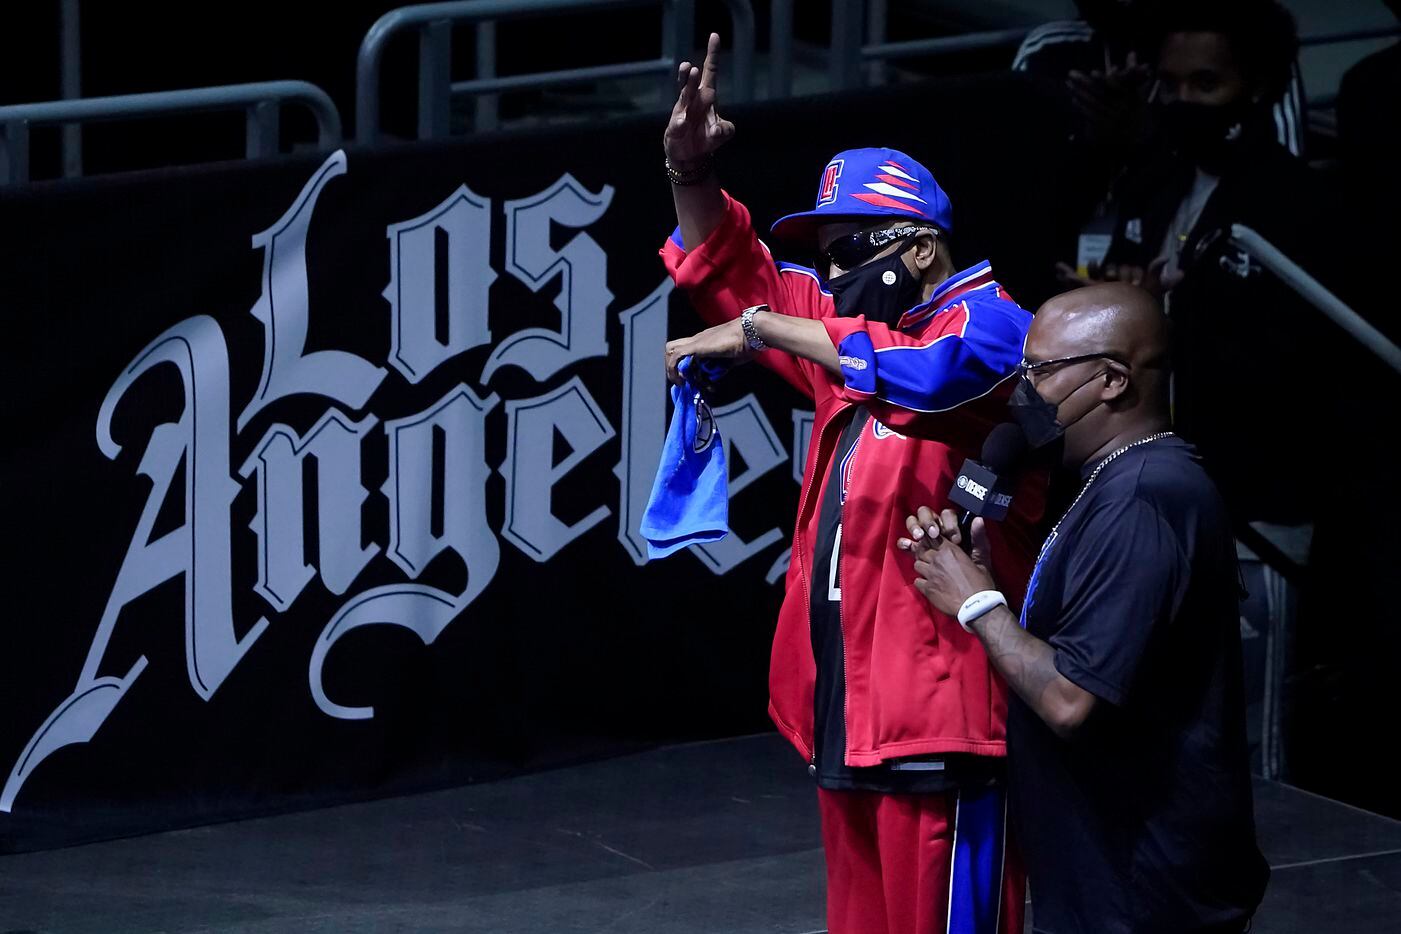 Rapper Tone Loc motions to the crowed during the first half of an NBA playoff basketball game between the Dallas Mavericks and the LA Clippers at Staples Center on Tuesday, May 25, 2021, in Los Angeles.